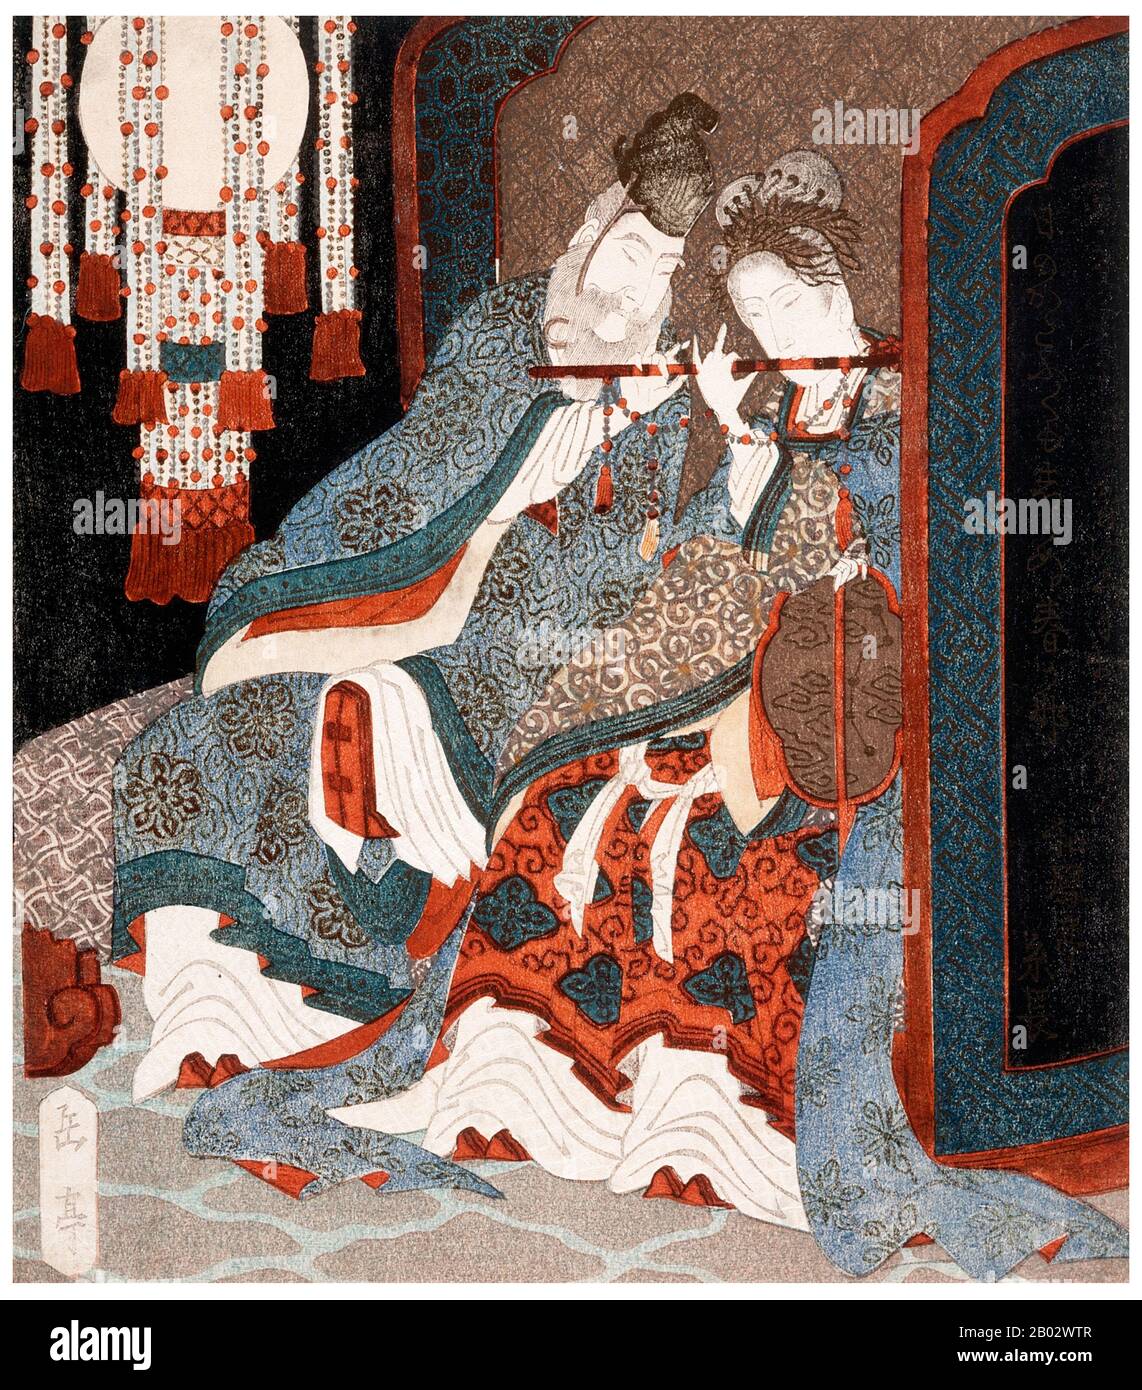 Consort Yang Yuhuan (1 June 719 — 15 July 756), often known as Yang Guifei (Guifei being the highest rank for imperial consorts during her time), known briefly by the Taoist nun name Taizhen, is famous as one of the Four Beauties of Ancient China.  She was the beloved consort of Emperor Xuanzong of Tang during his later years. During the Anshi Rebellion, as Emperor Xuanzong was fleeing from the capital Chang'an to Chengdu, she was killed because his guards blamed the rebellion on her powerful cousin Yang Guozhong and the rest of her family. Stock Photo